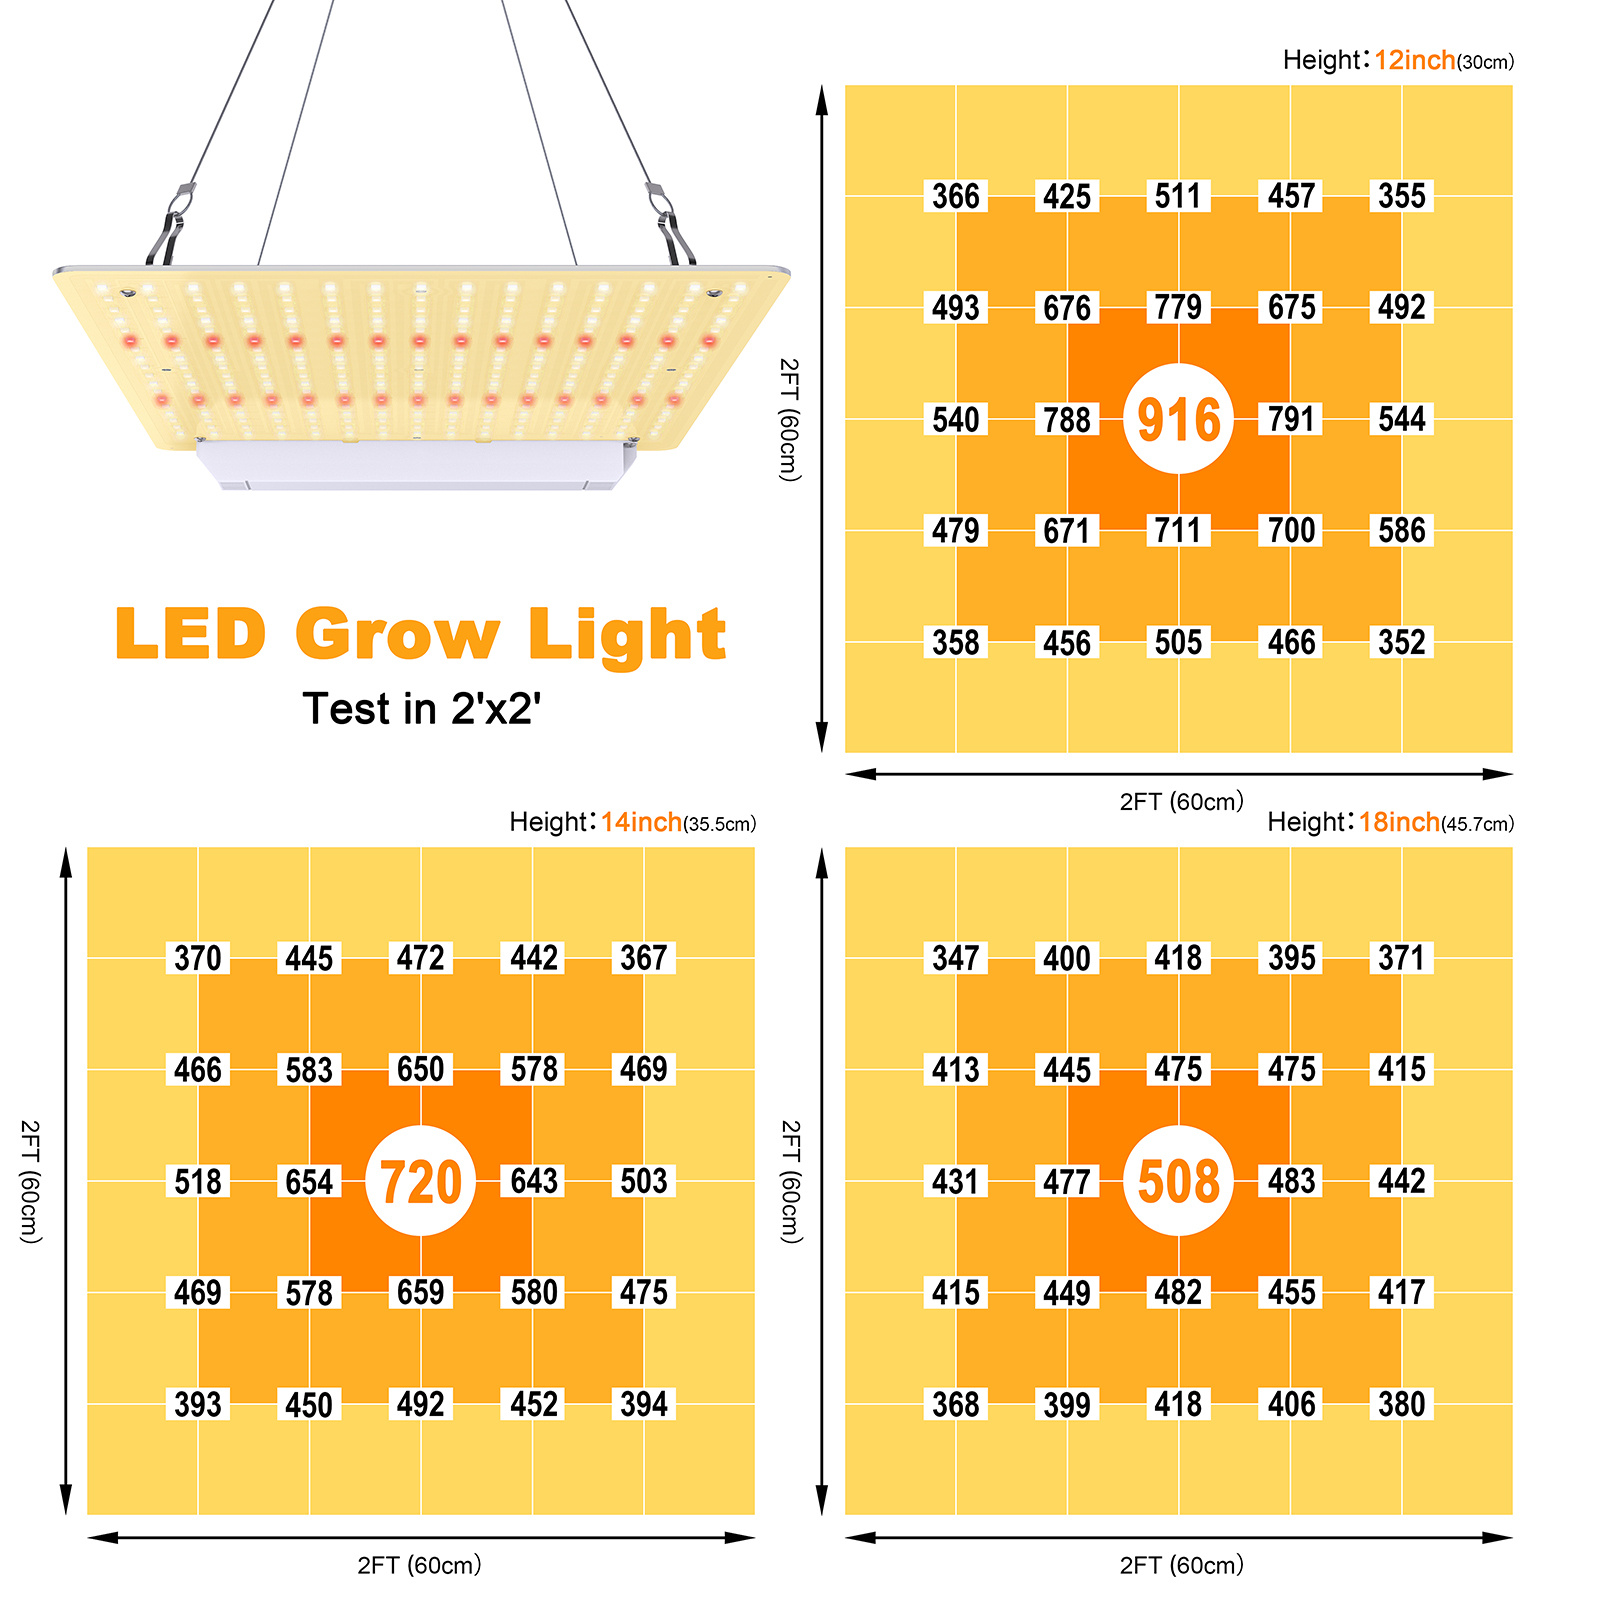 Cheeroll Grow Light 600W LED Grow Light, 2x2Ft Plant Grow Light 270PCS Lamp Bead, Featuring High PPFD High Output Grow Lights, Waterproof Rating up to IP65, for Indoor Plant Growing Vegetables Flowers